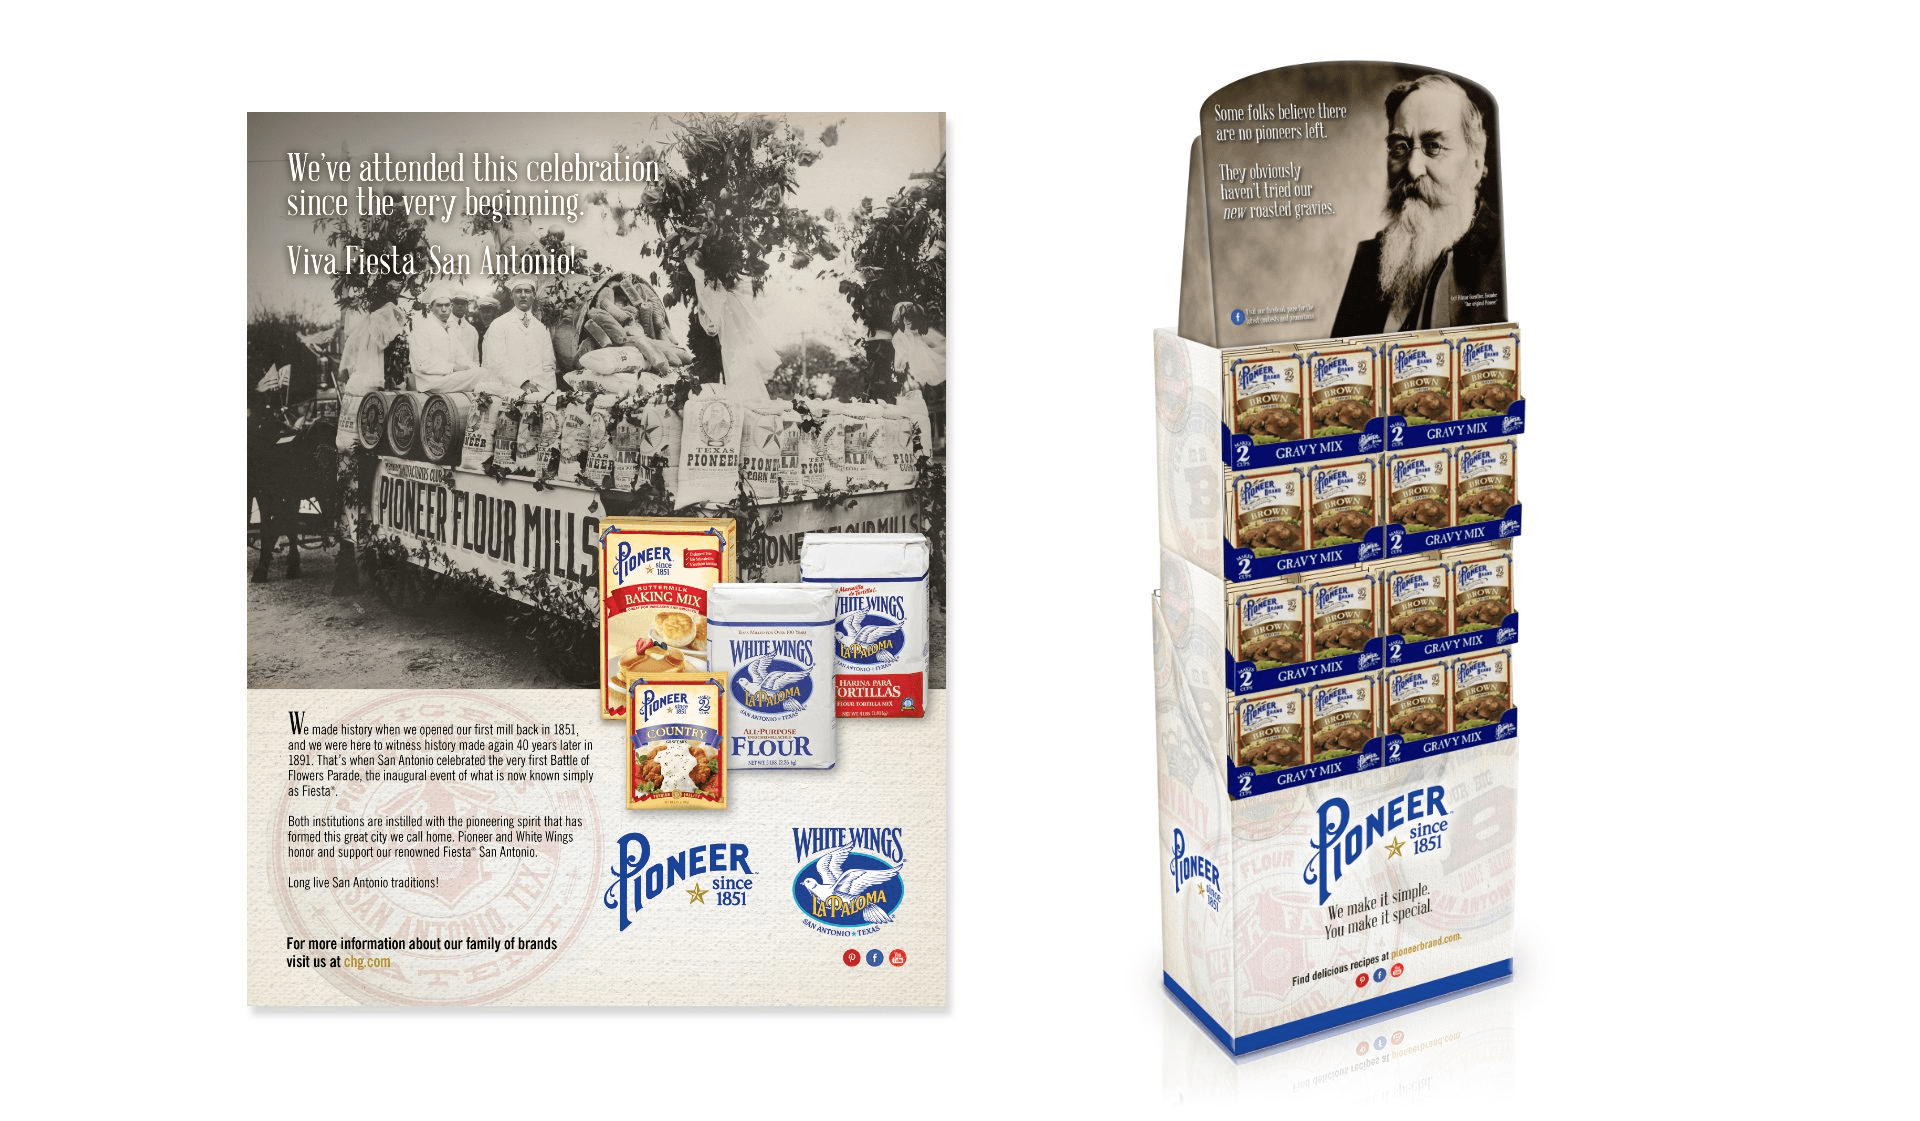 Pioneer Flour Ad and Display